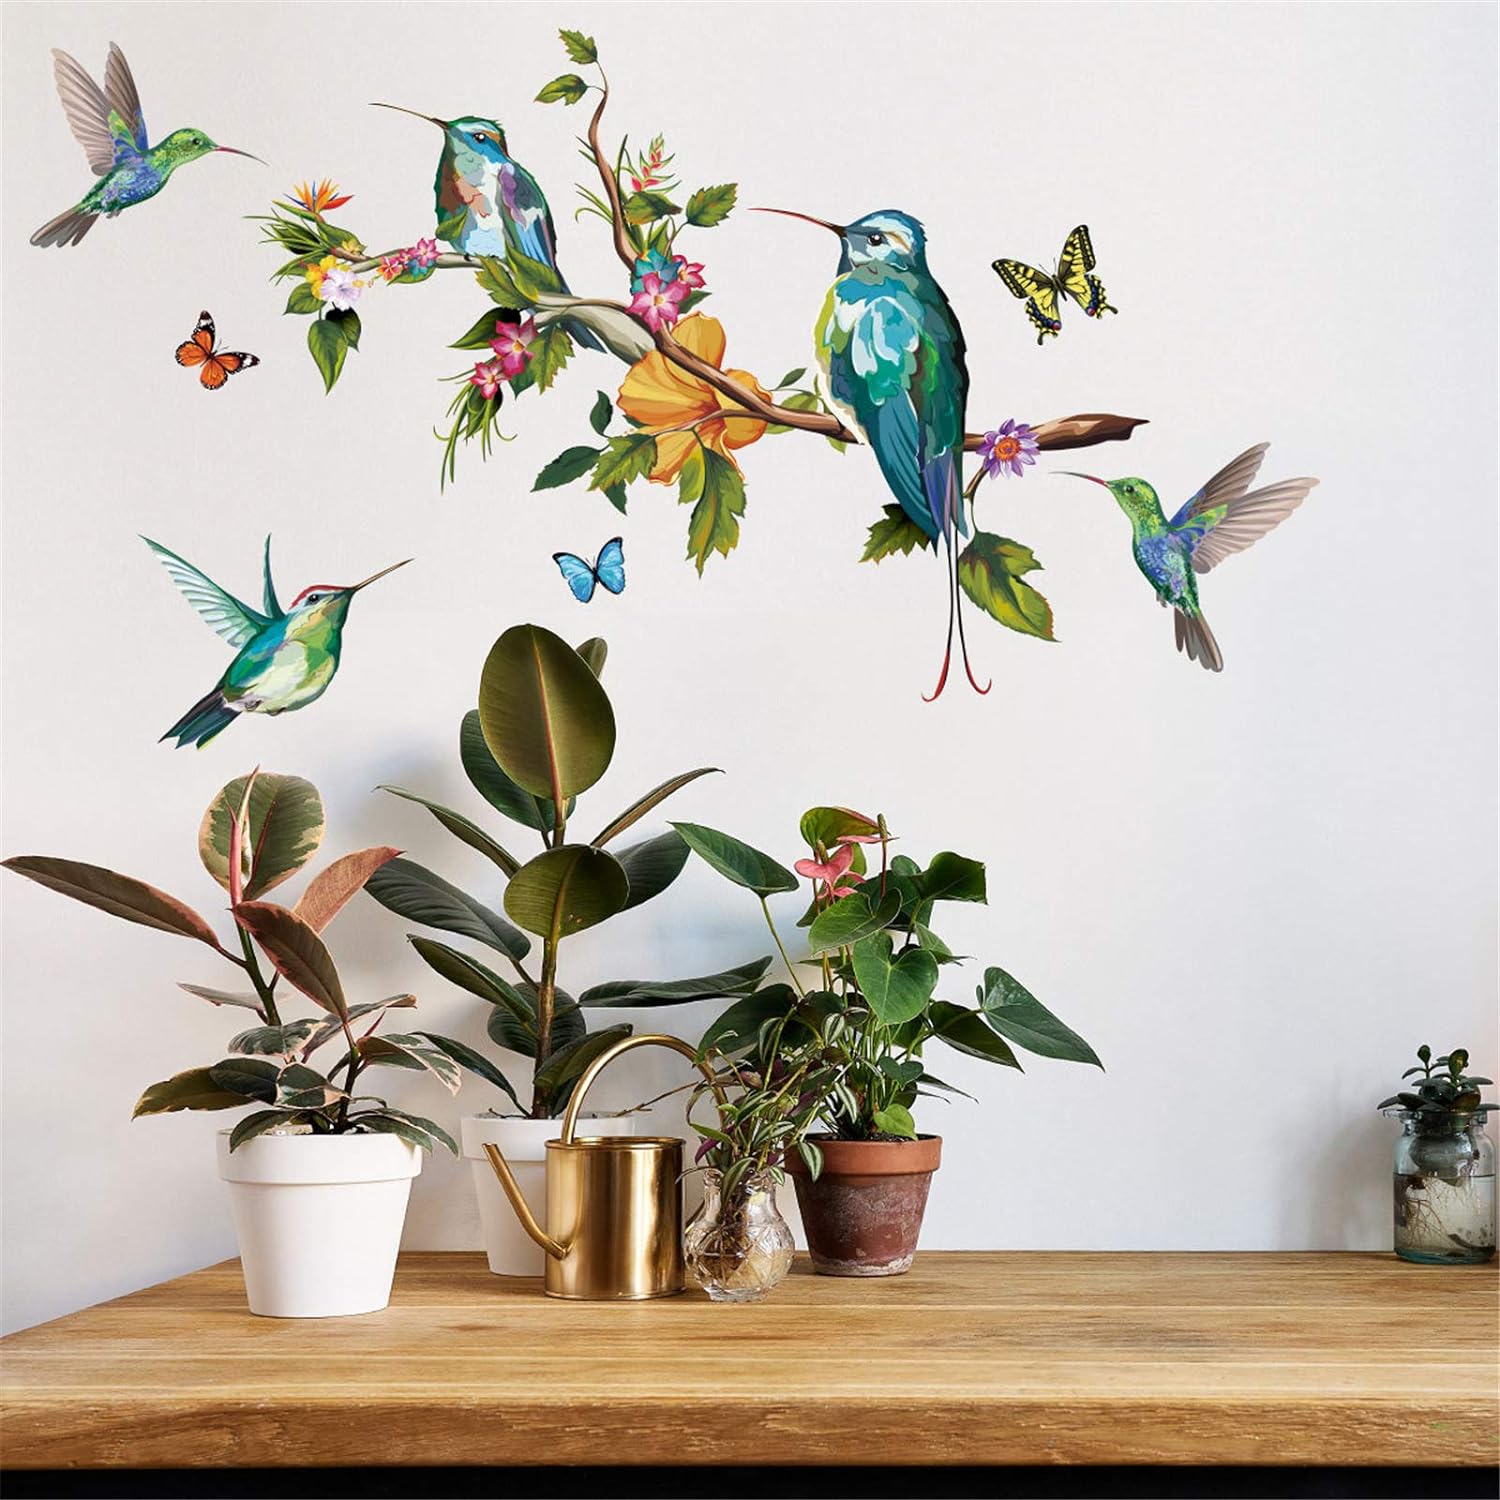 Nature Tree Branch with Flying Garden Song Birds Wall Art Decals Window Stickers Vinyl Girl Kids Decor Decoration Murals Painting for Living Room Bedroom Office Kitchen Home School Classroom for Party